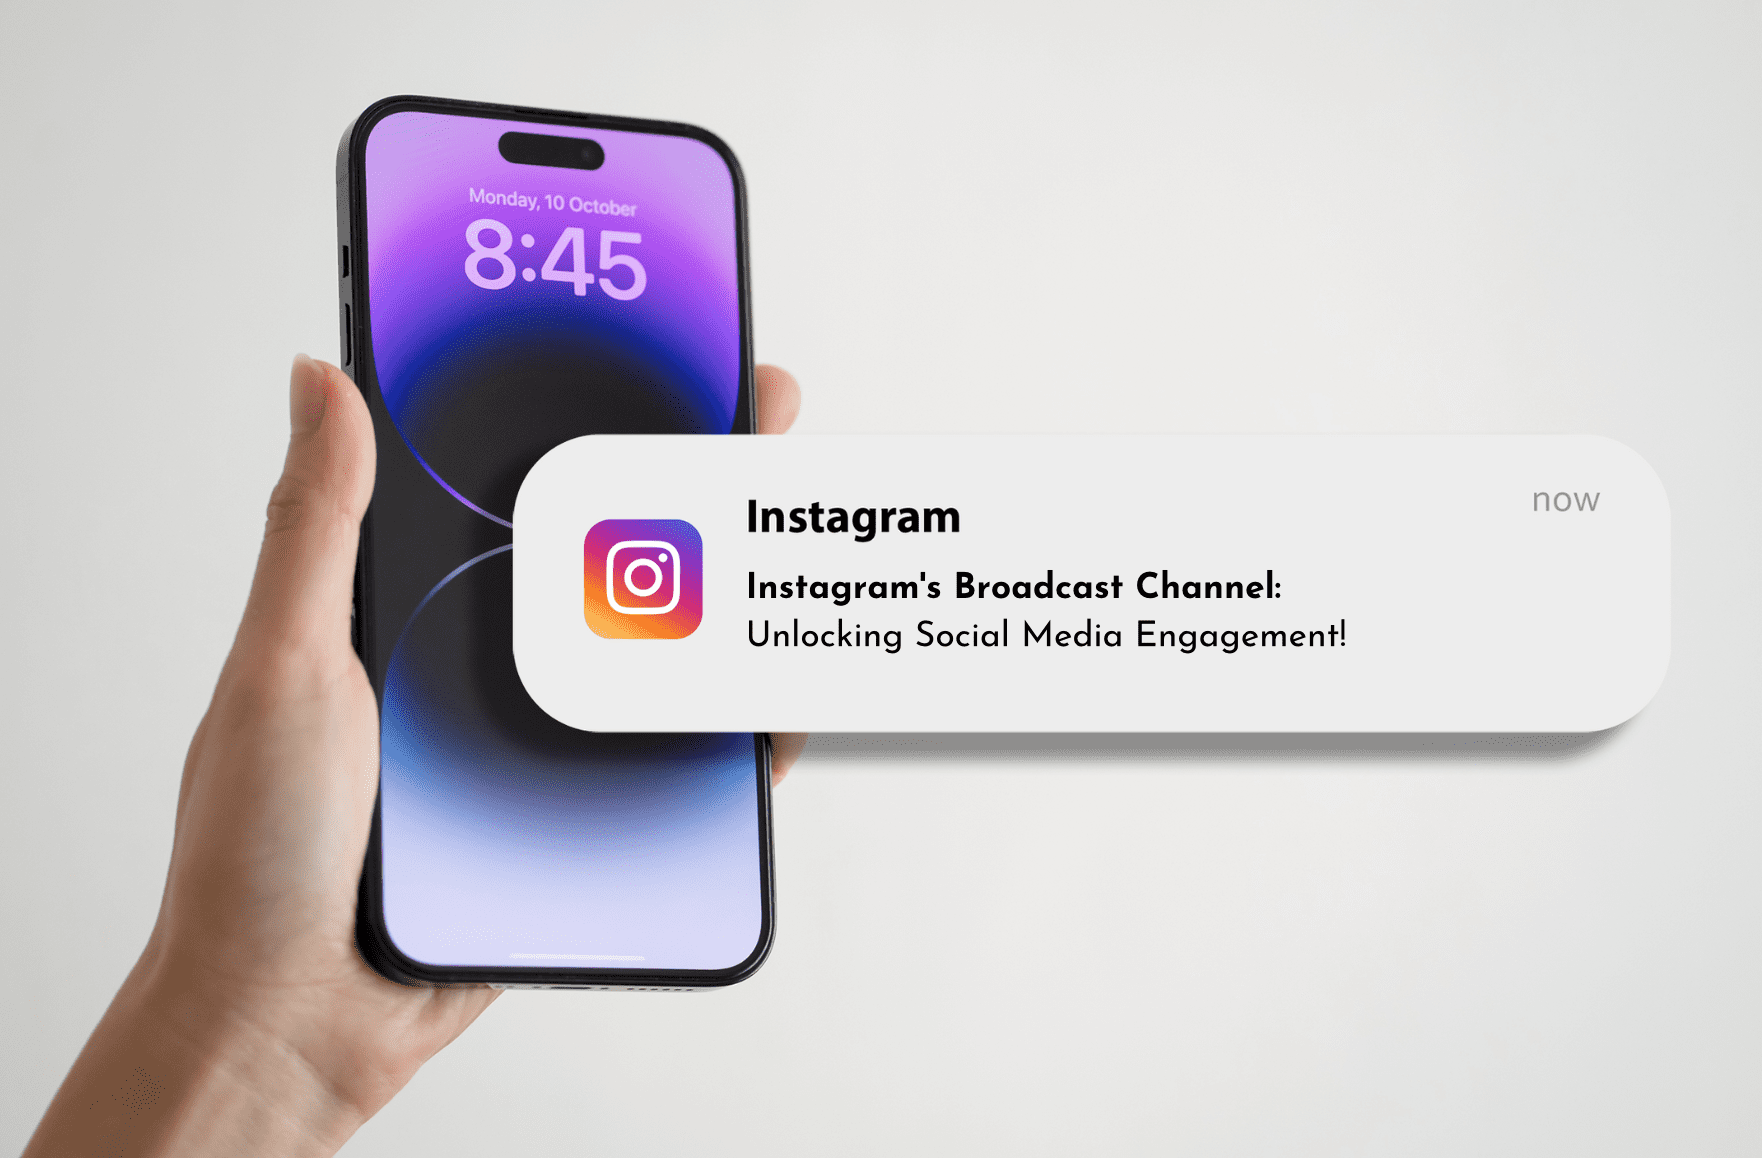 Instagram's broadcast channel